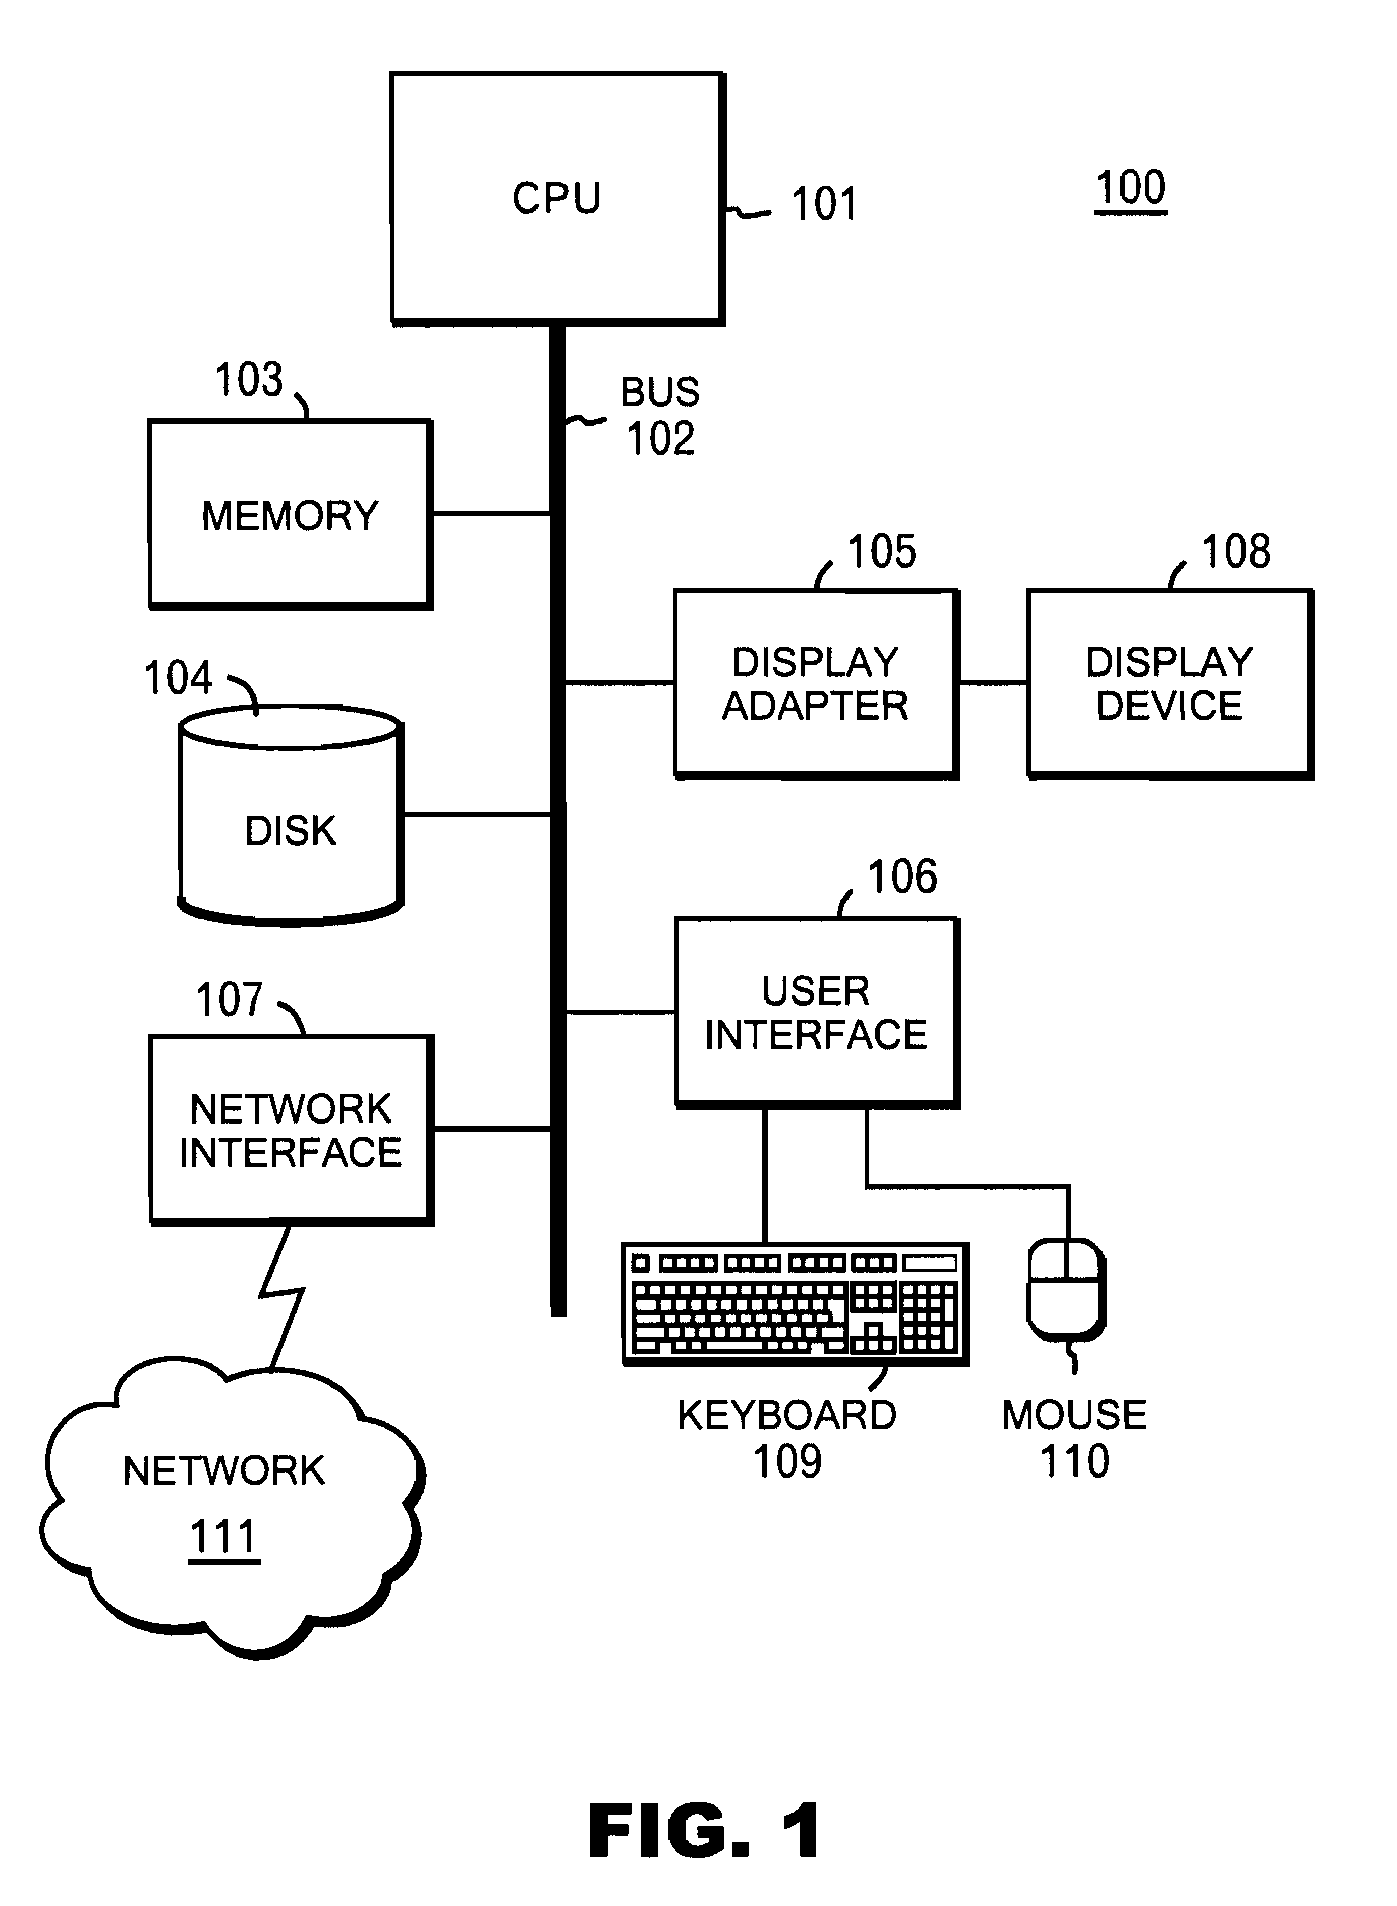 System and method for deriving stochastic performance evaluation model from annotated uml design model